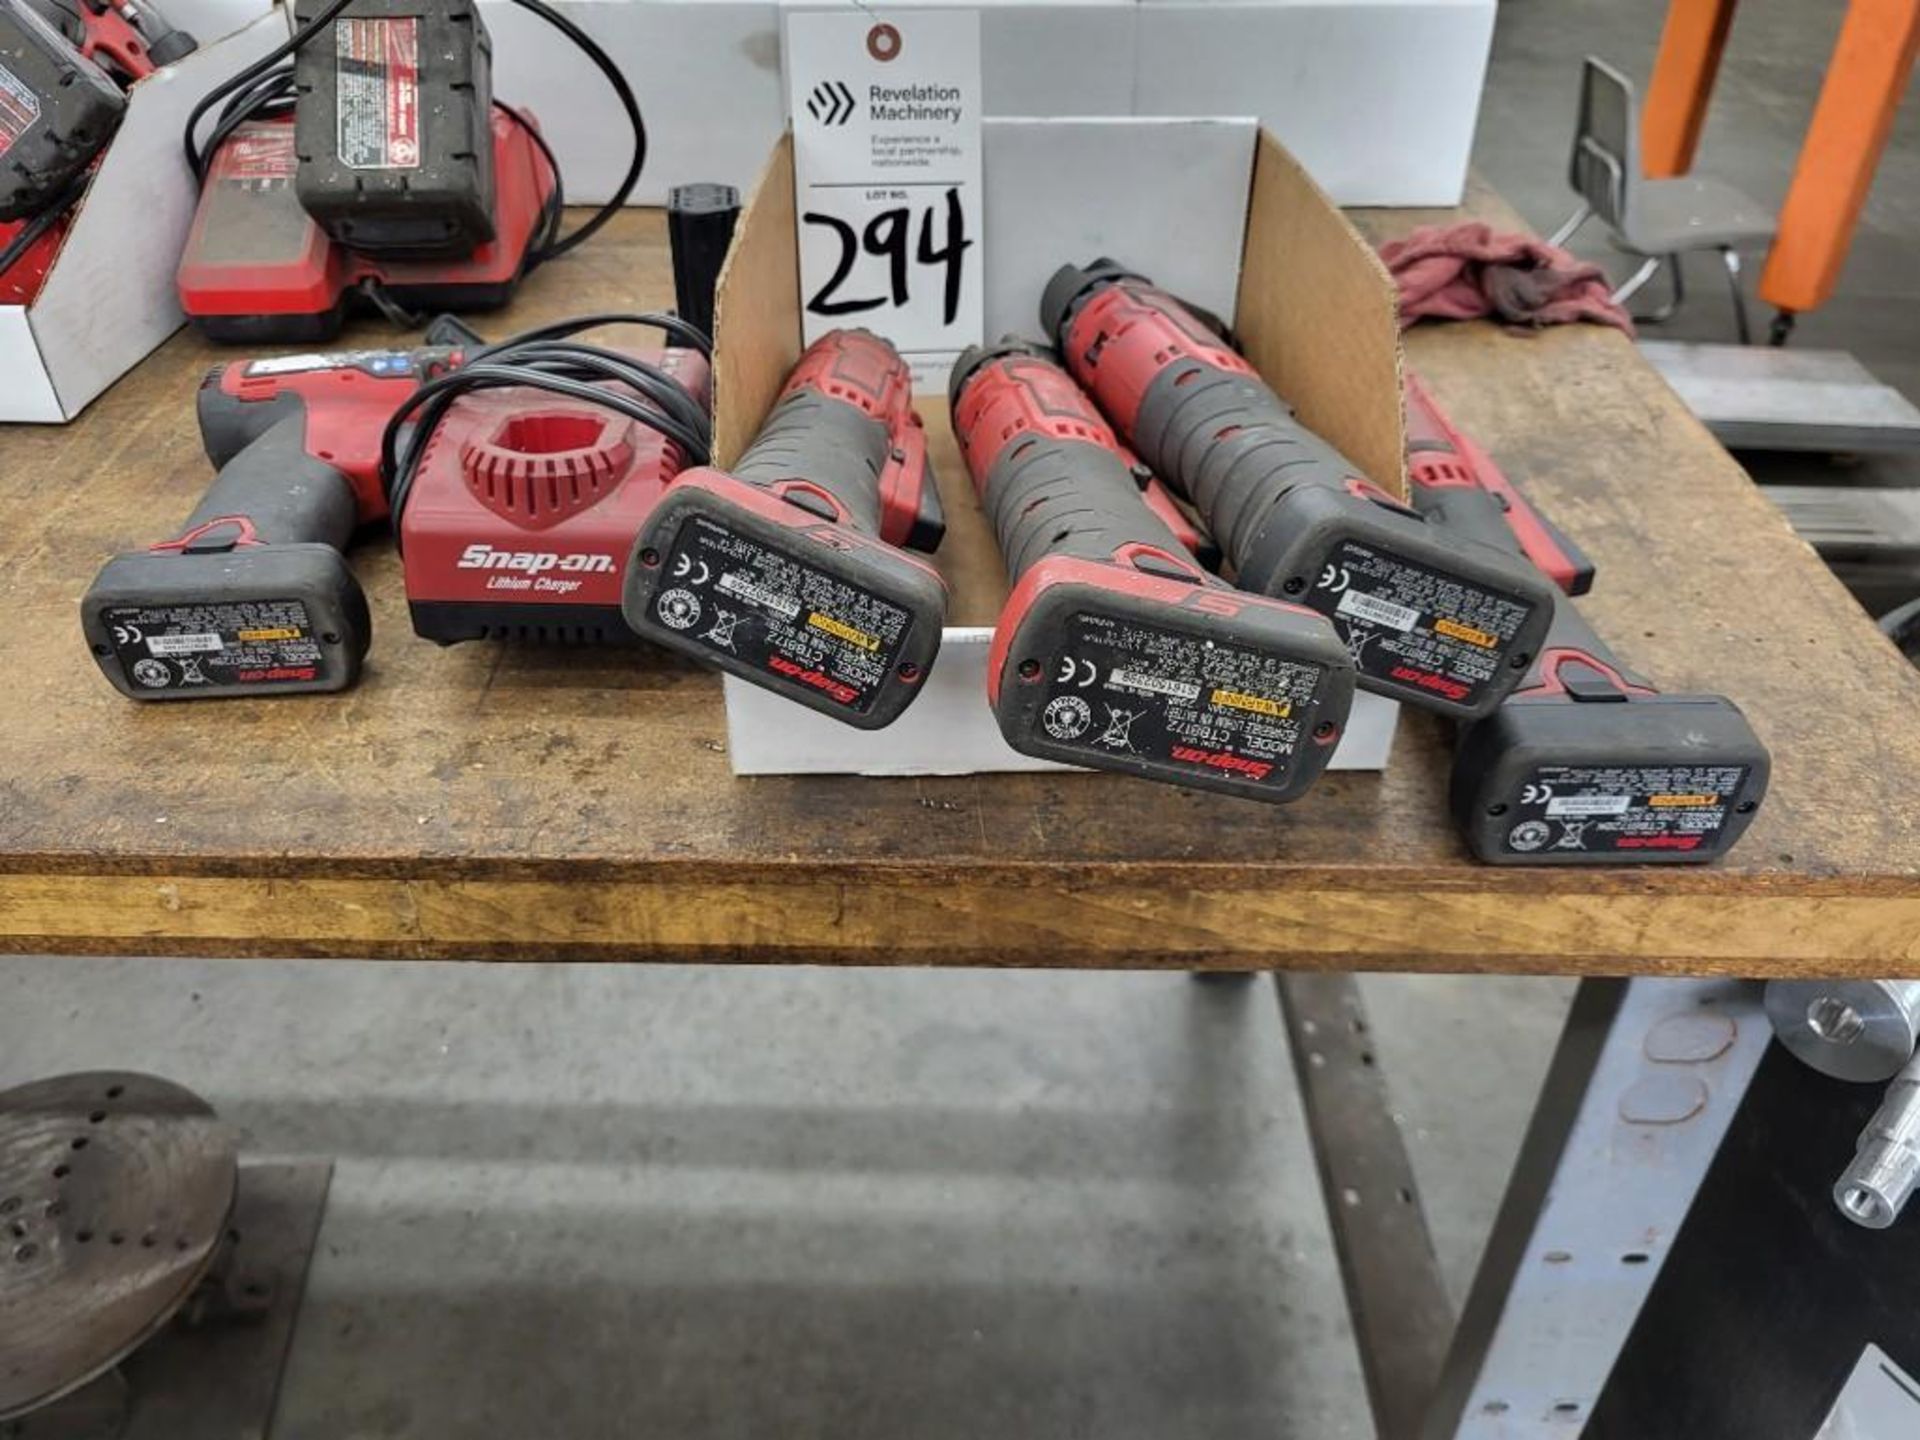 LOT OF SNAP-ON CORDLESS DRILLS AND DRIVERS. WITH CHARGER AND BATTERIES - Image 6 of 6